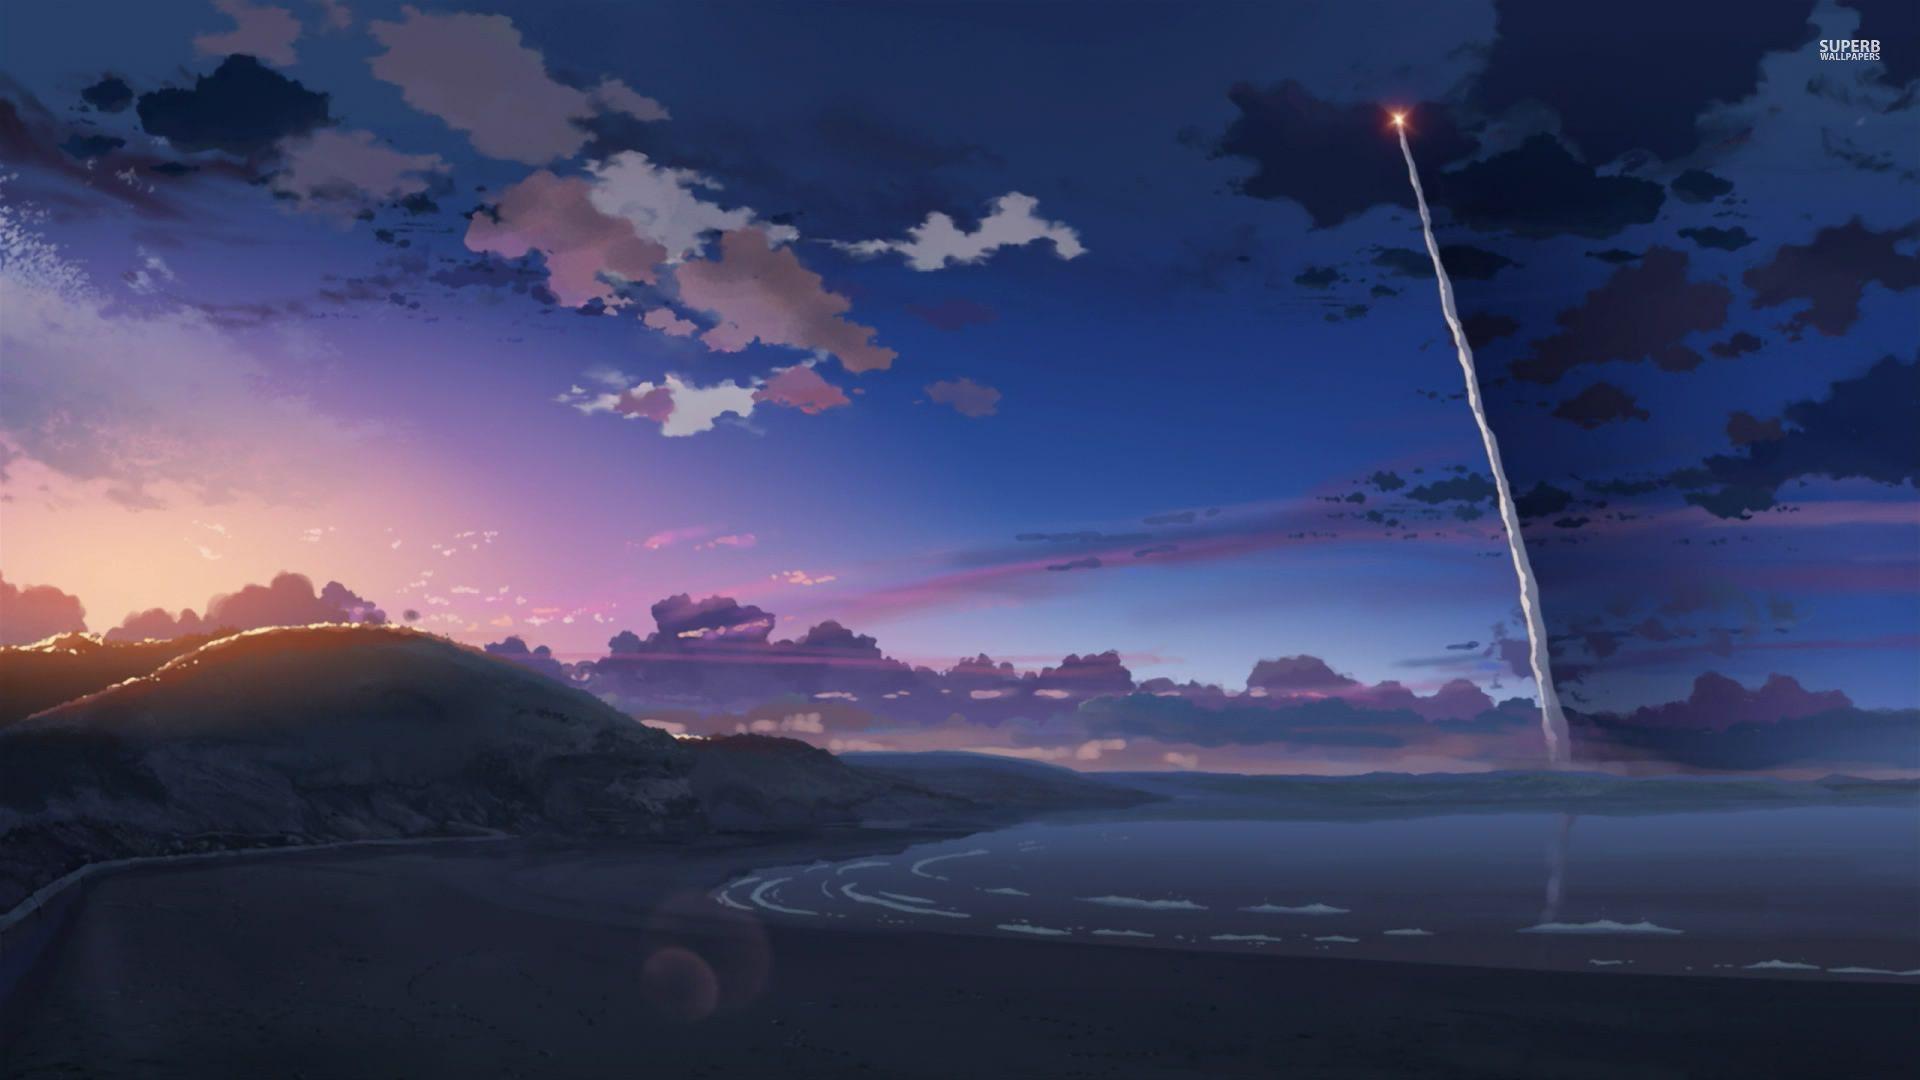 You guys asked for wallpapers from 5 Centimeters Per Second, here are  some 8k UHD stills from the movie! : r/anime